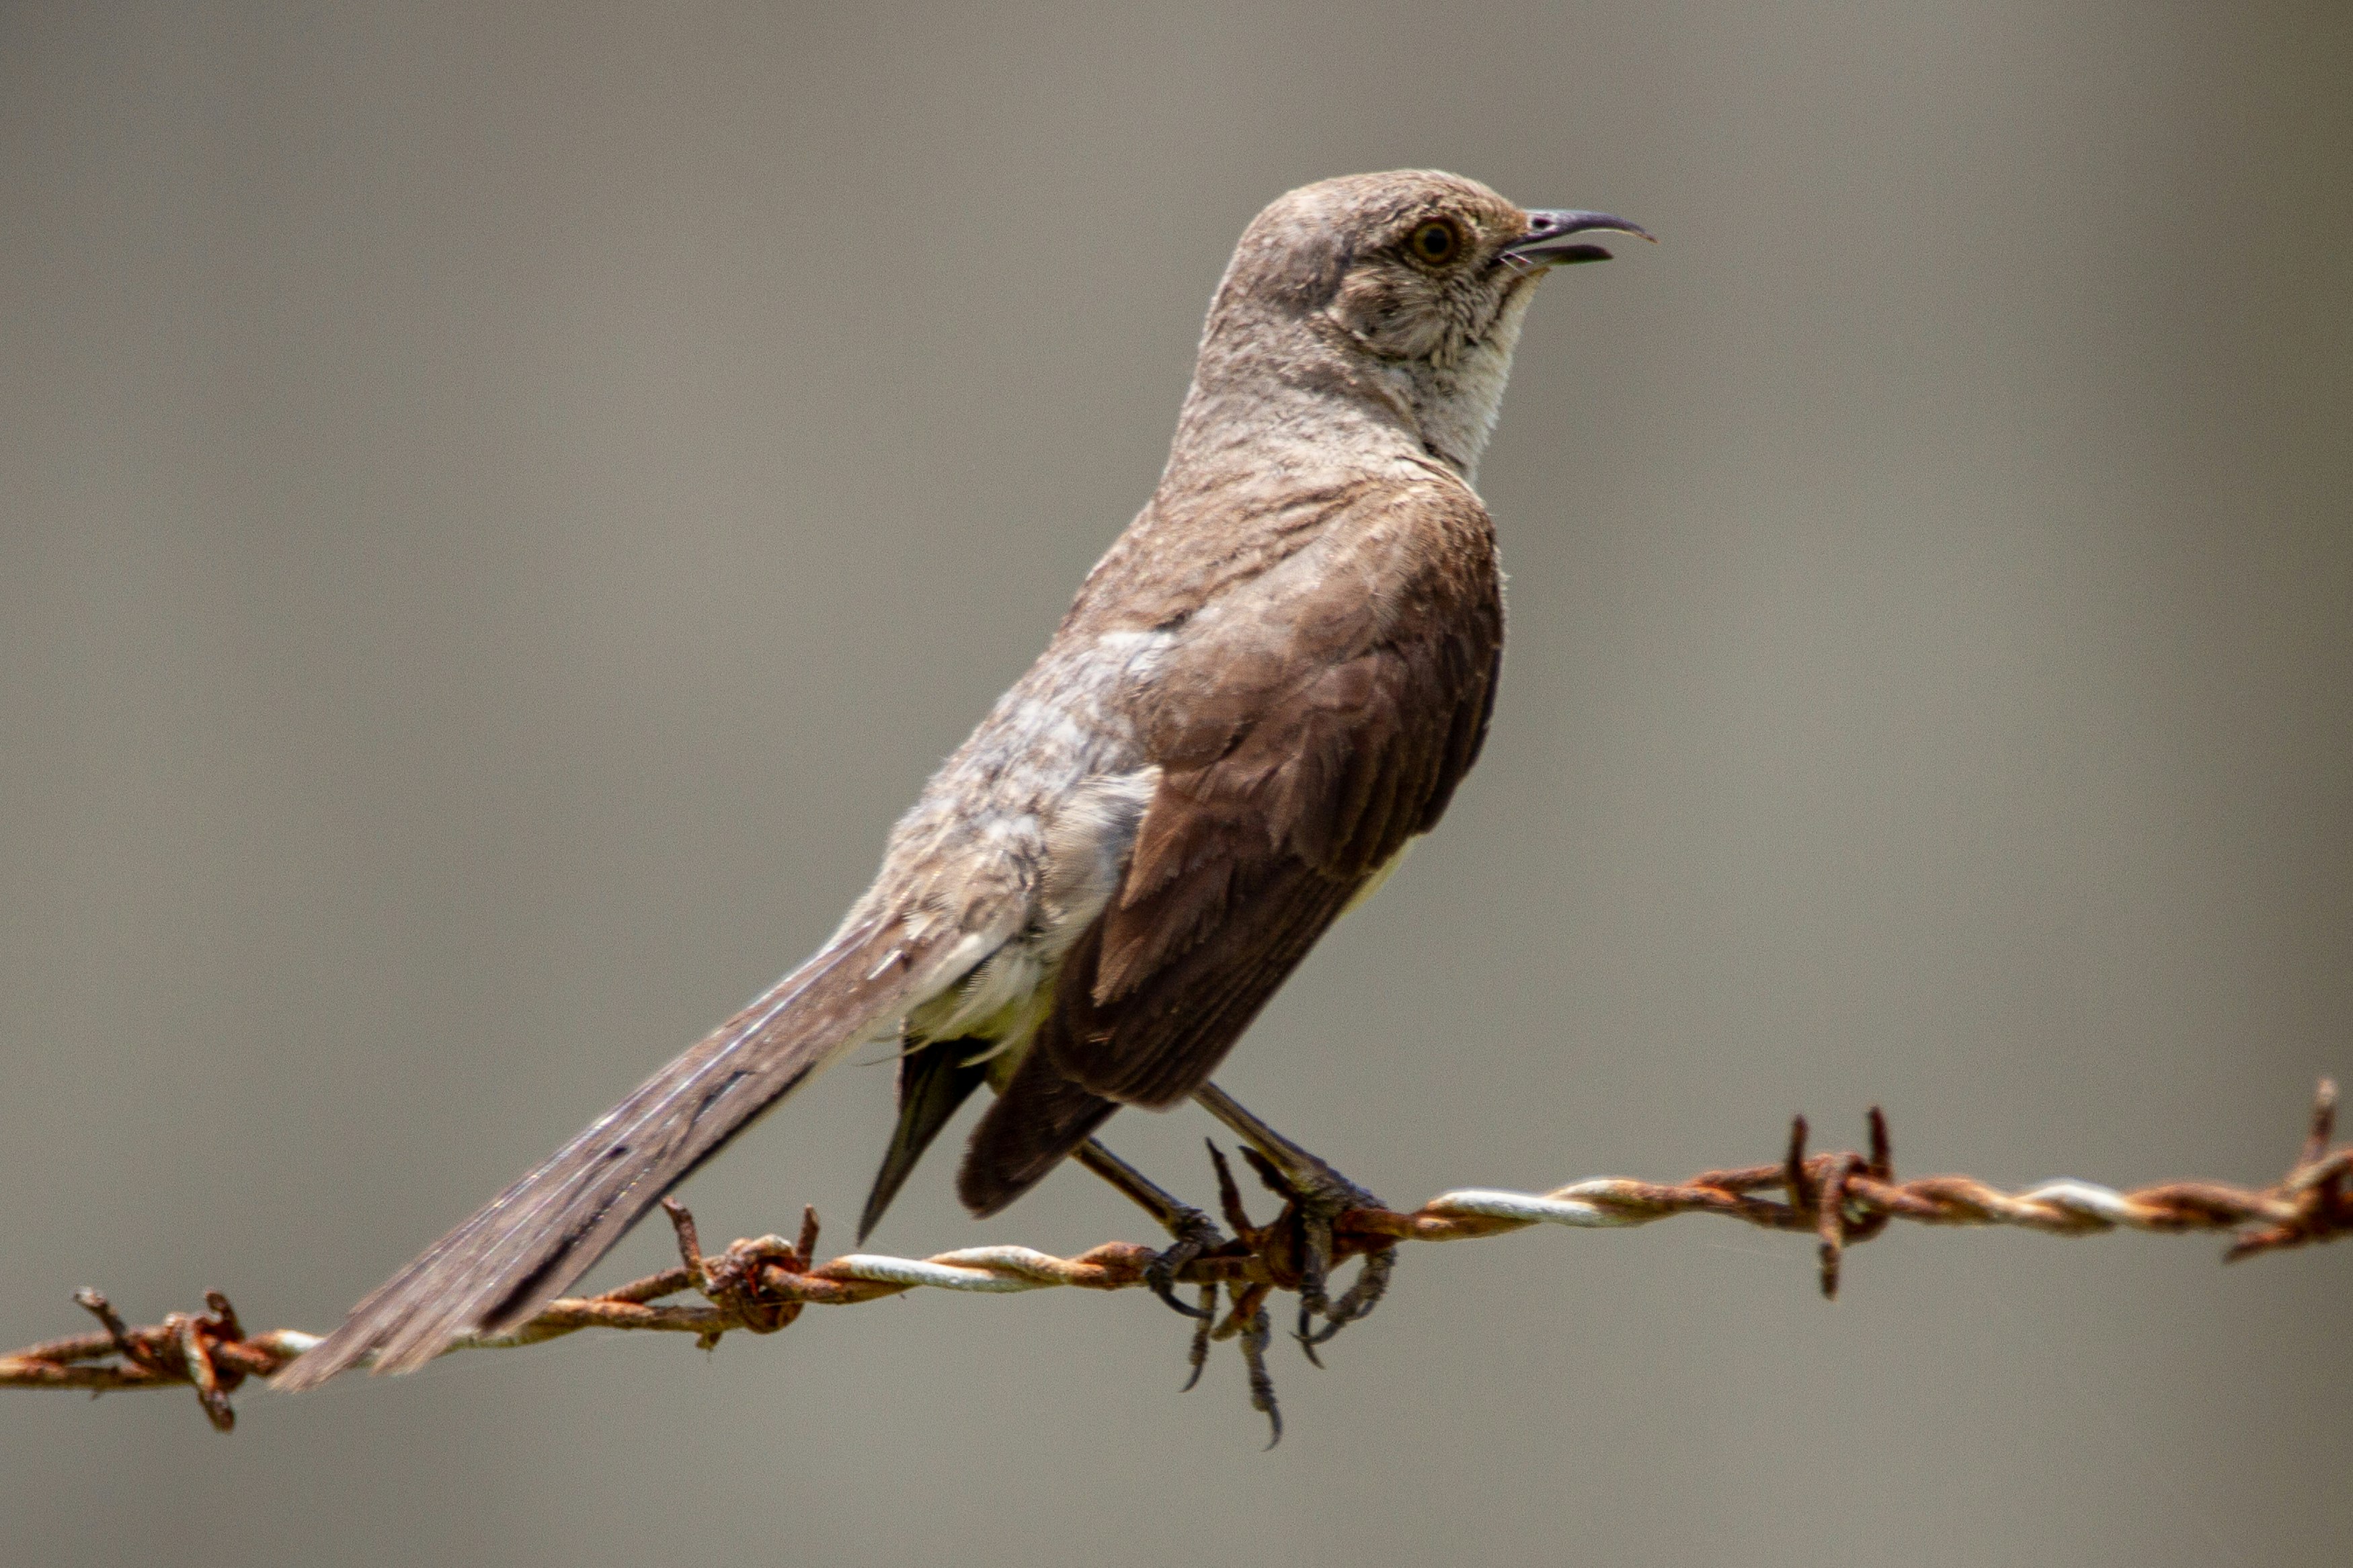 A northern mockingbird perches on a barbed wire fence.